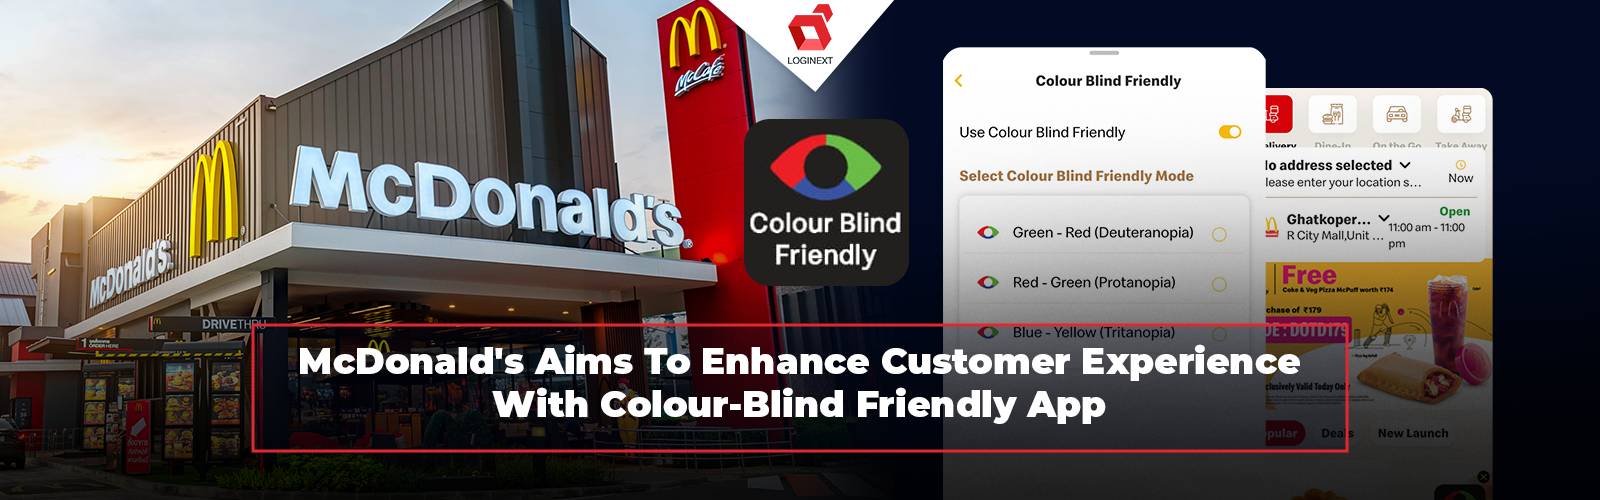 McDonald’s Aims To Enhance Customer Experience With Color-Blind Friendly App